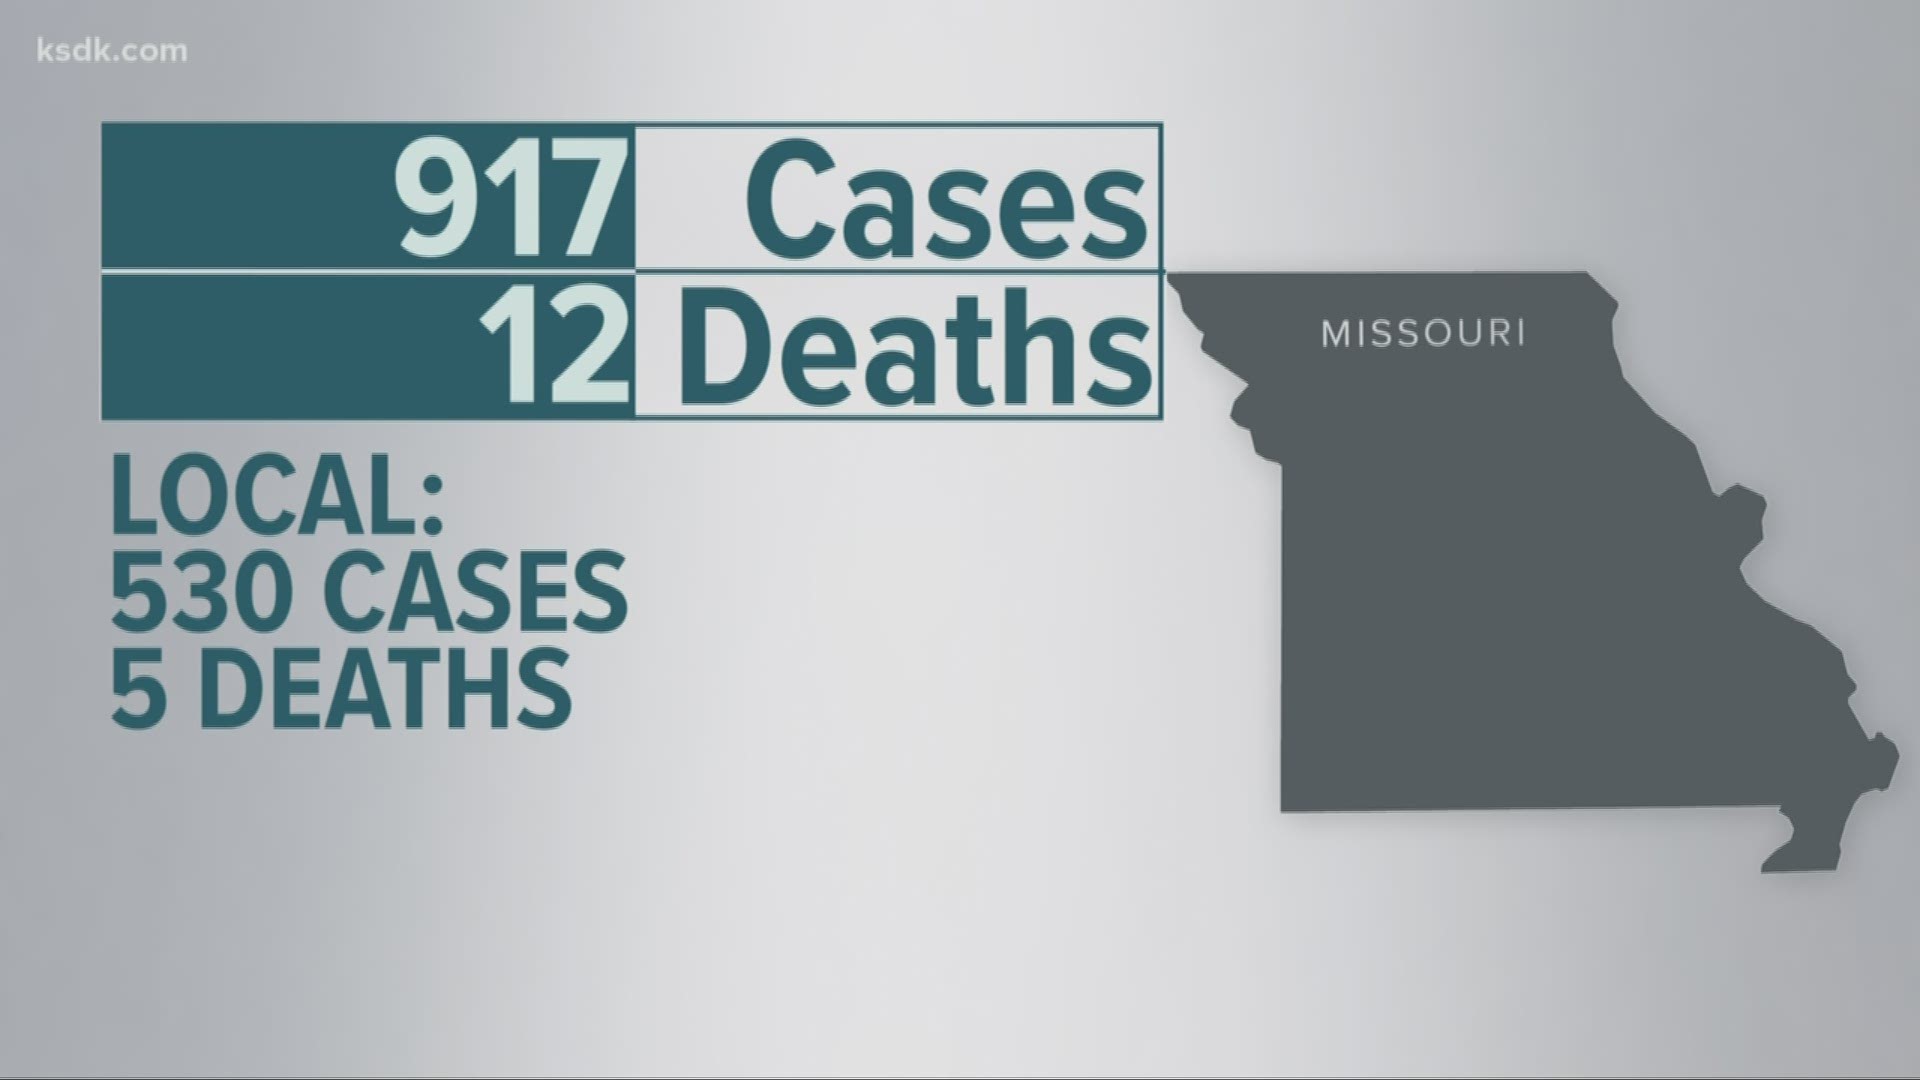 Illinois had more than 1,000 new cases Sunday, and Missouri is nearing 1,000 total cases.